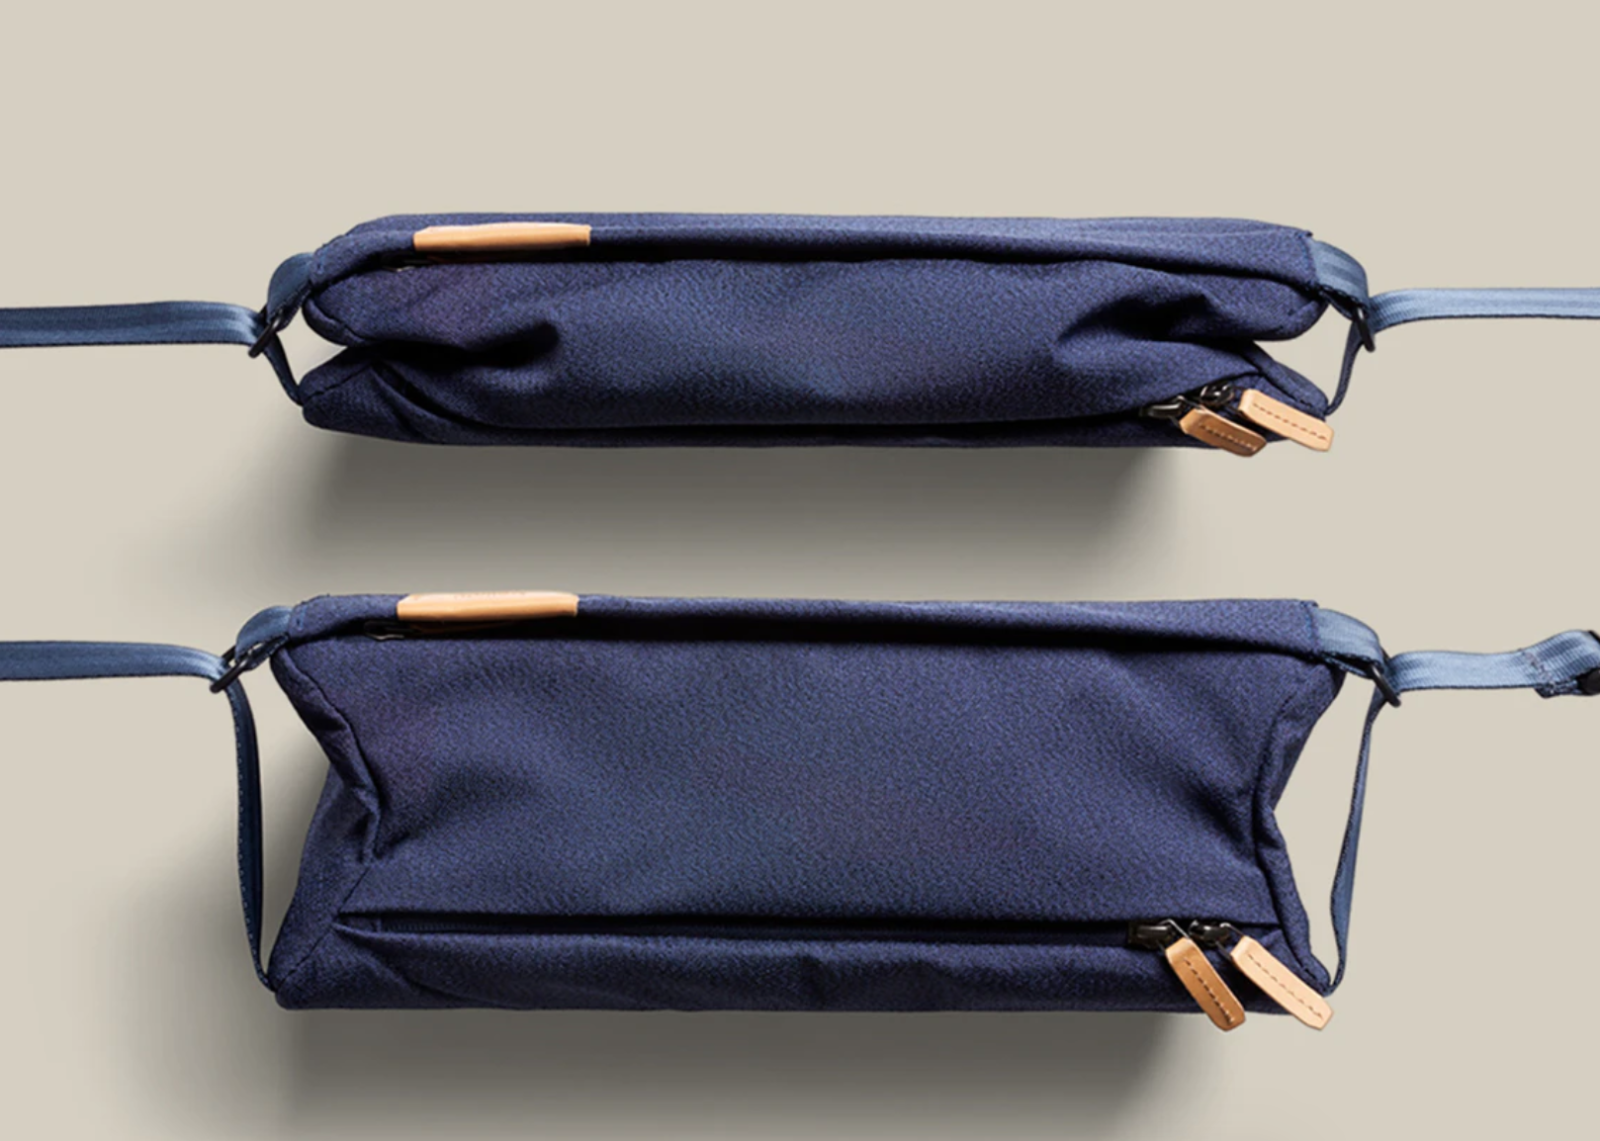 The Bellroy Sling expands